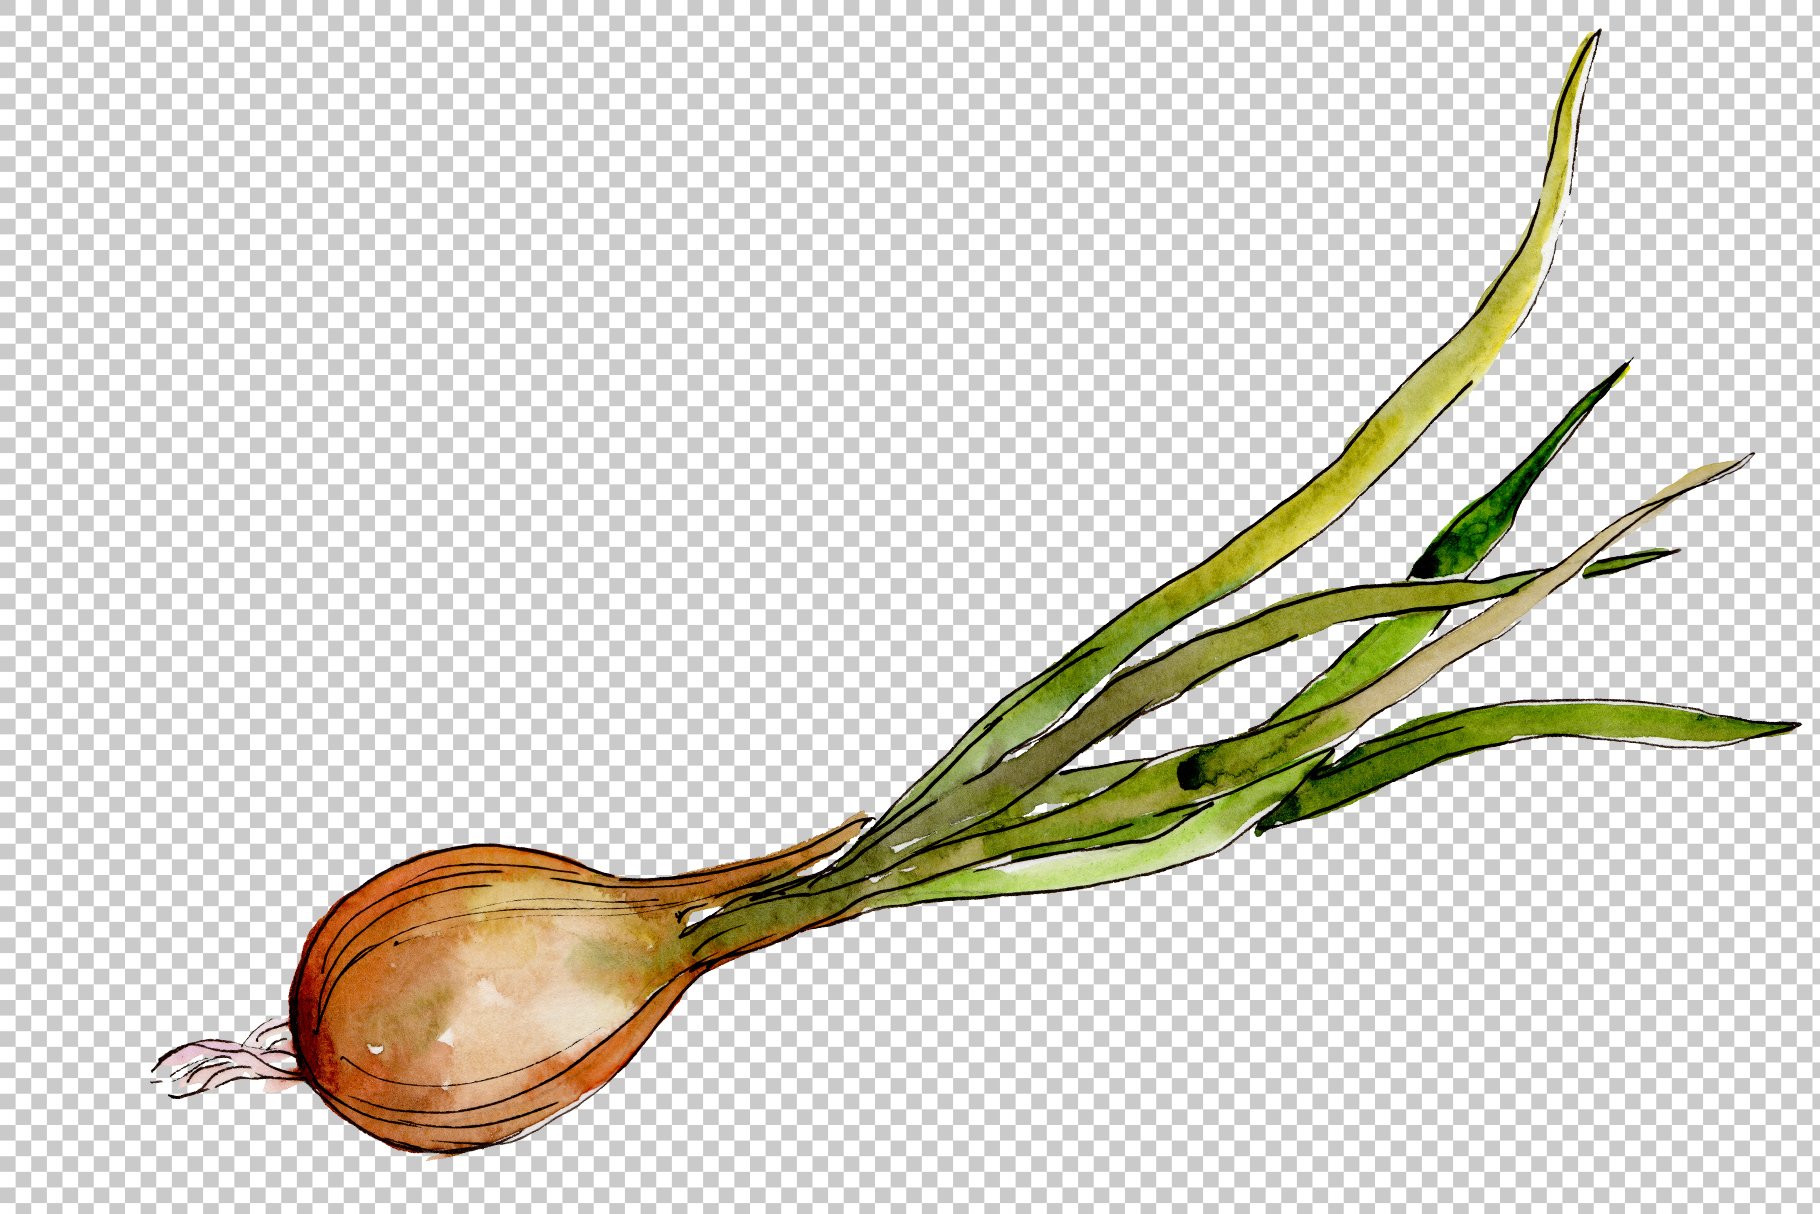 Transparent background with high quality onion.